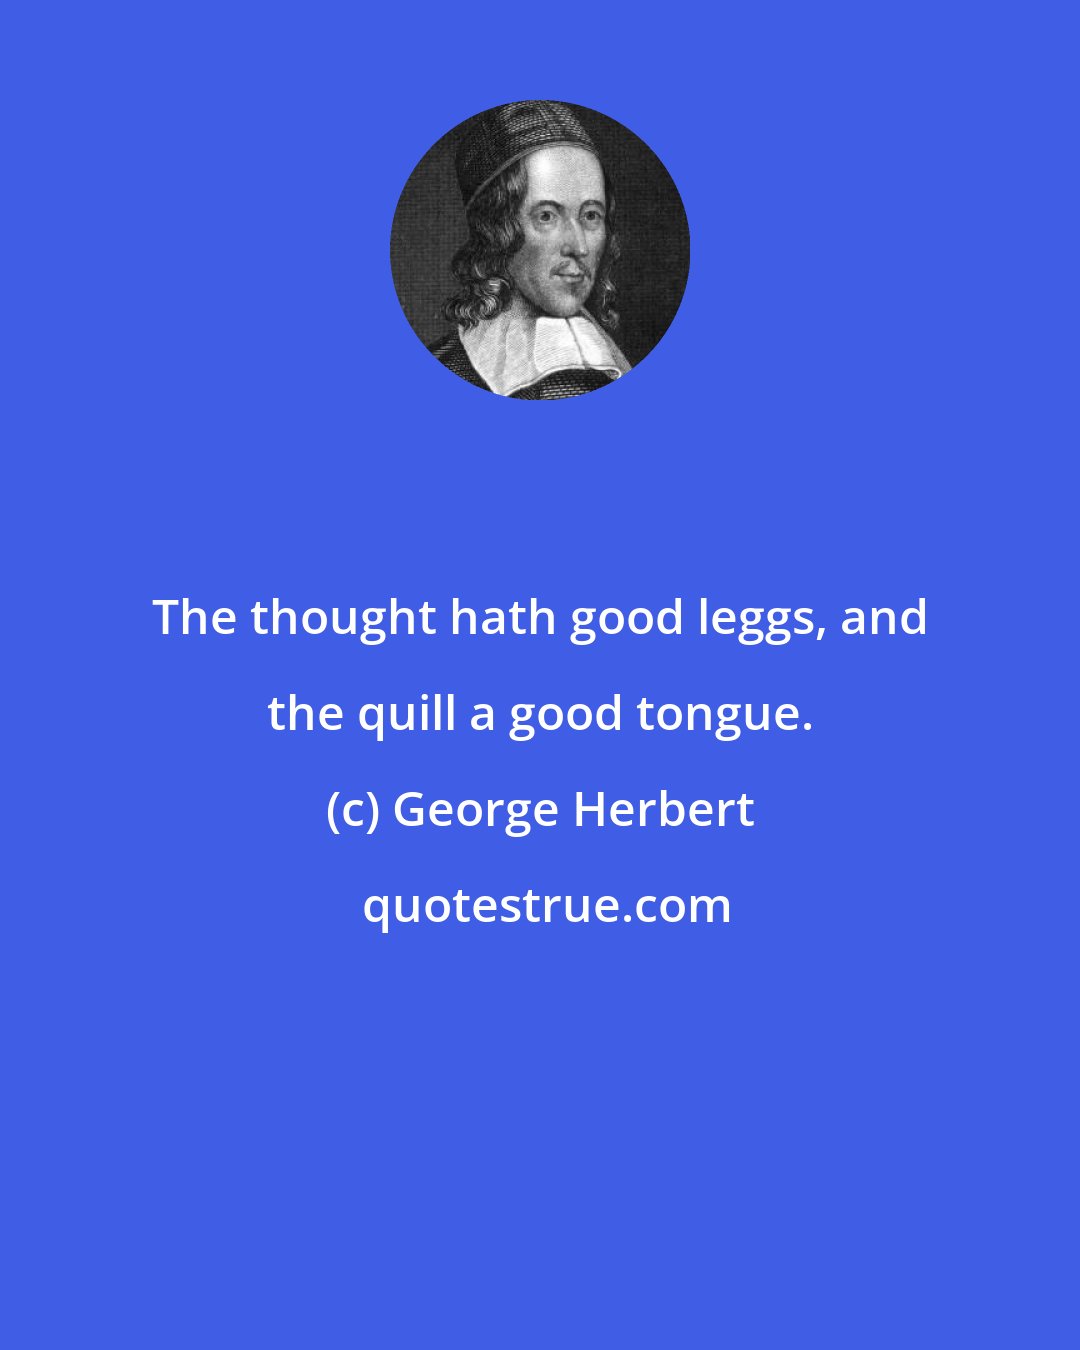 George Herbert: The thought hath good leggs, and the quill a good tongue.